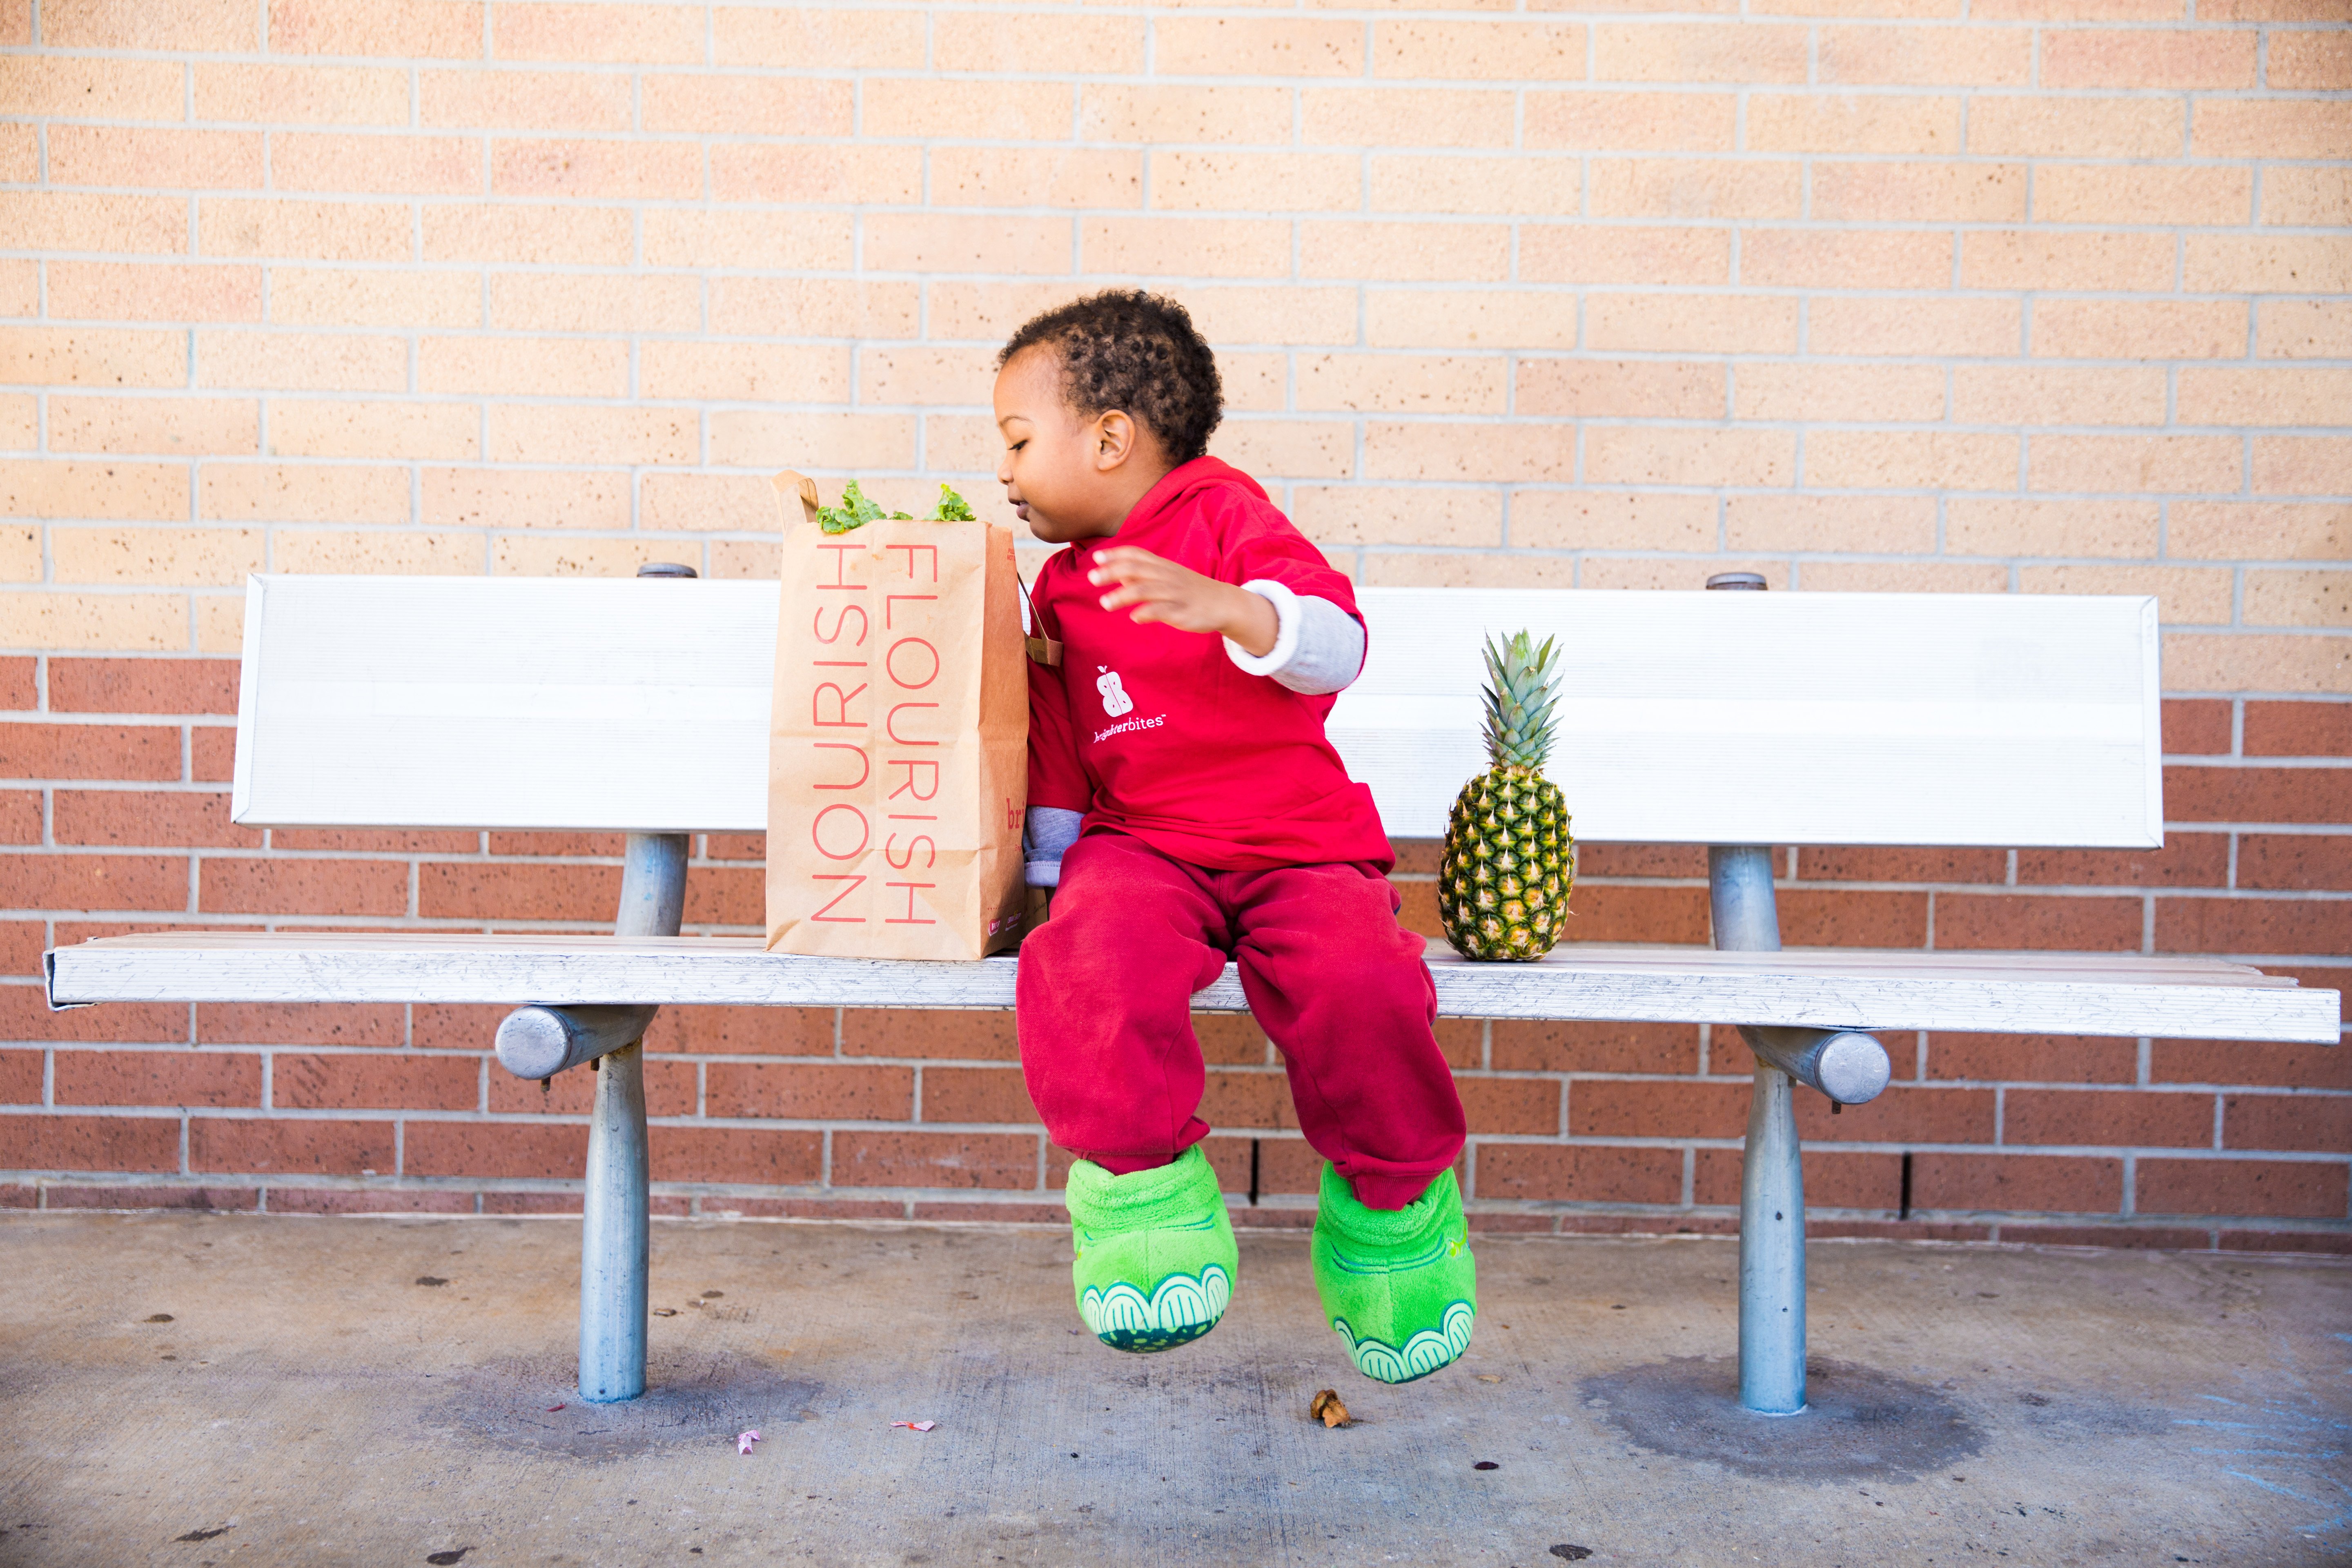 Humana Foundation awards $249,963 to Produce Prescription to improve Food Insecurity and Health Outcomes among At-risk Children and Their Families